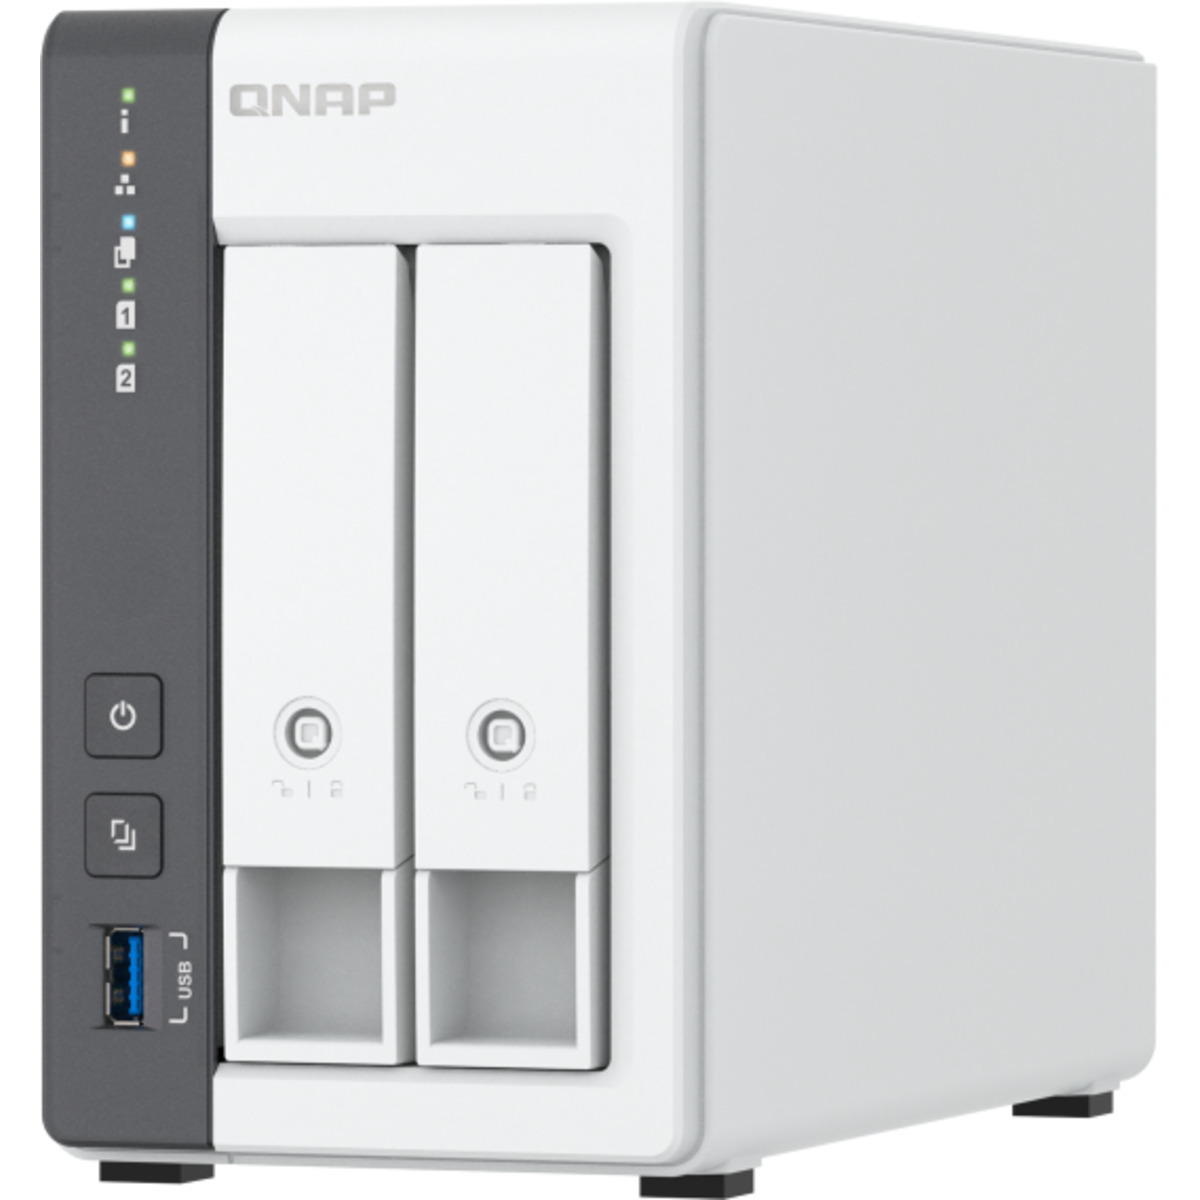 QNAP TS-216G 20tb 2-Bay Desktop Personal / Basic Home / Small Office NAS - Network Attached Storage Device 2x10tb Seagate EXOS X18 ST10000NM018G 3.5 7200rpm SATA 6Gb/s HDD ENTERPRISE Class Drives Installed - Burn-In Tested TS-216G